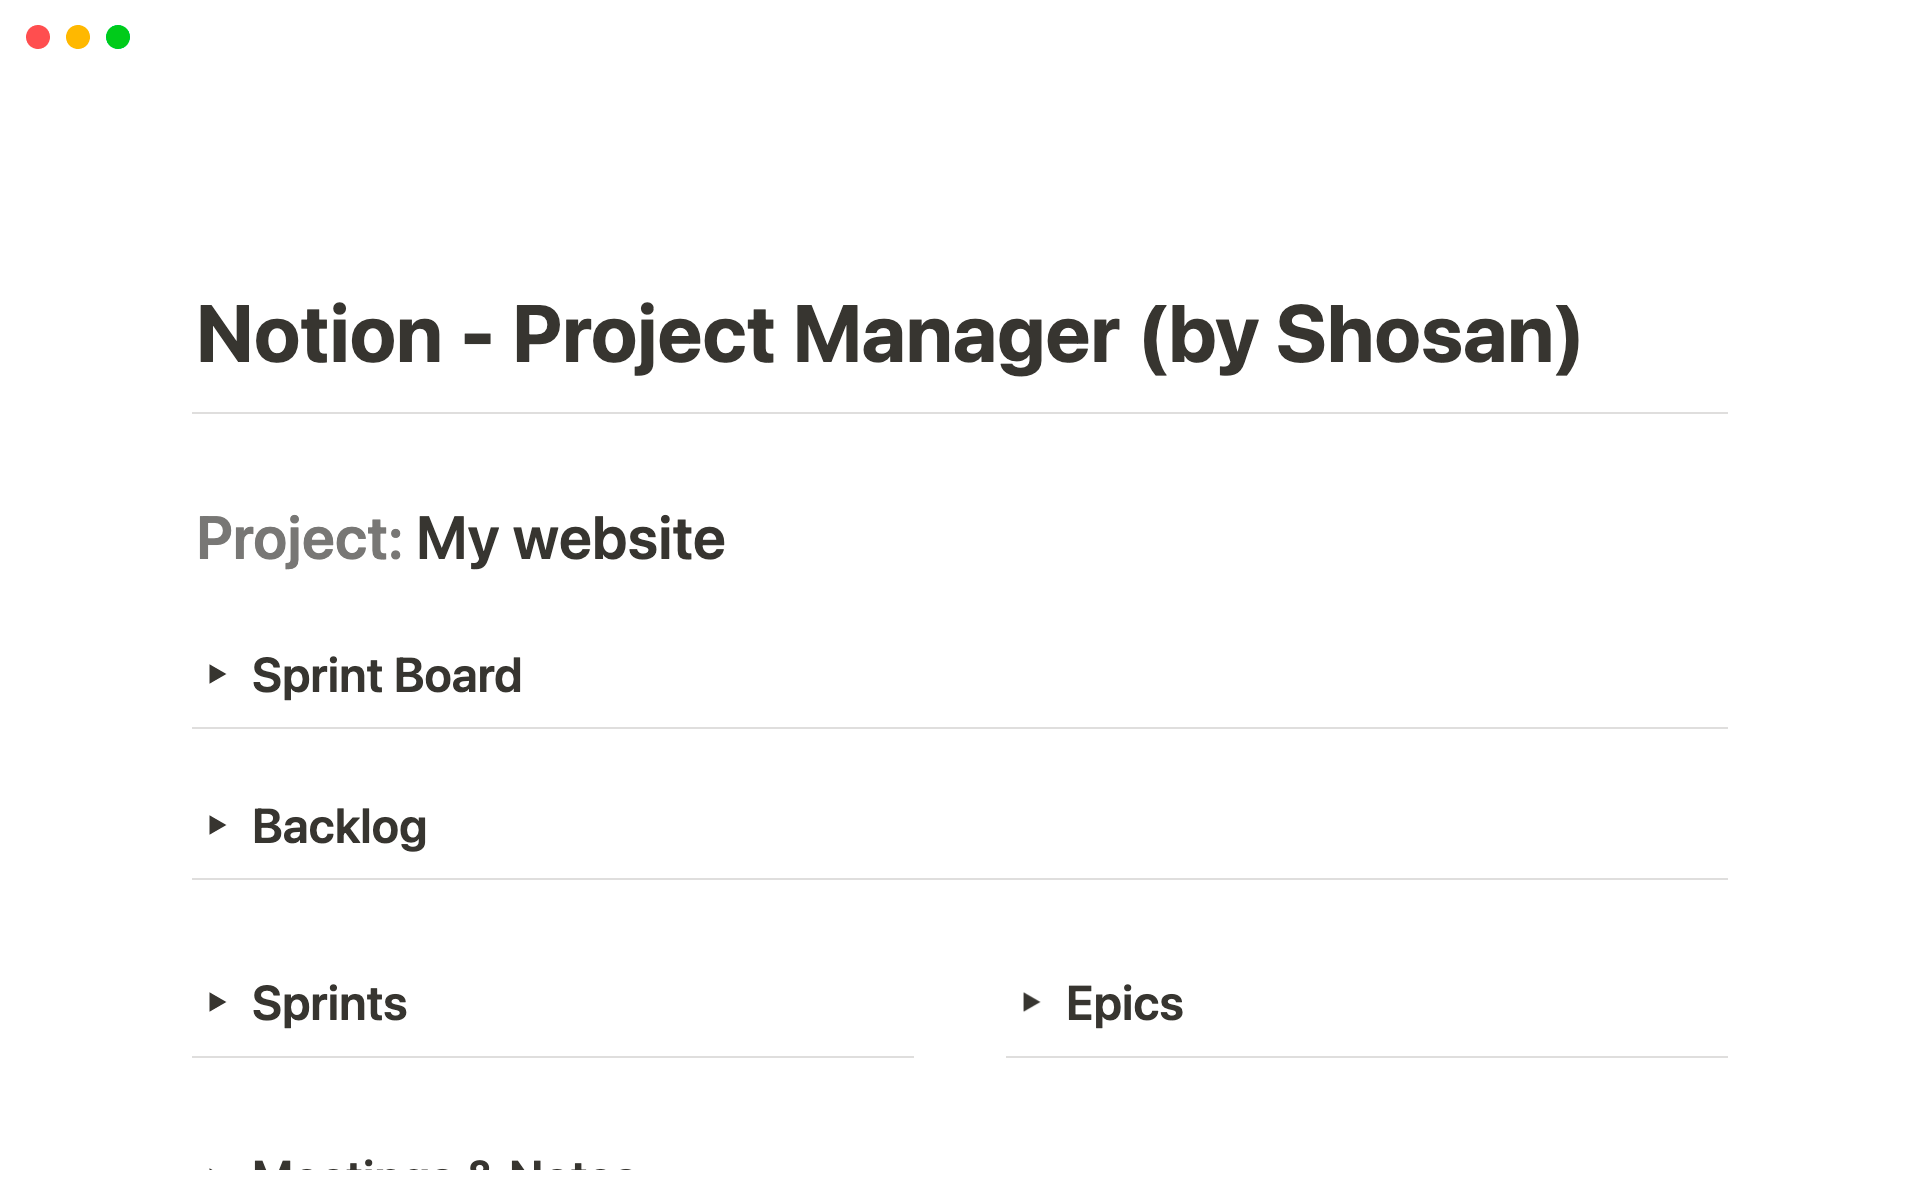 Notion Project Manager (by Shosan)のテンプレートのプレビュー